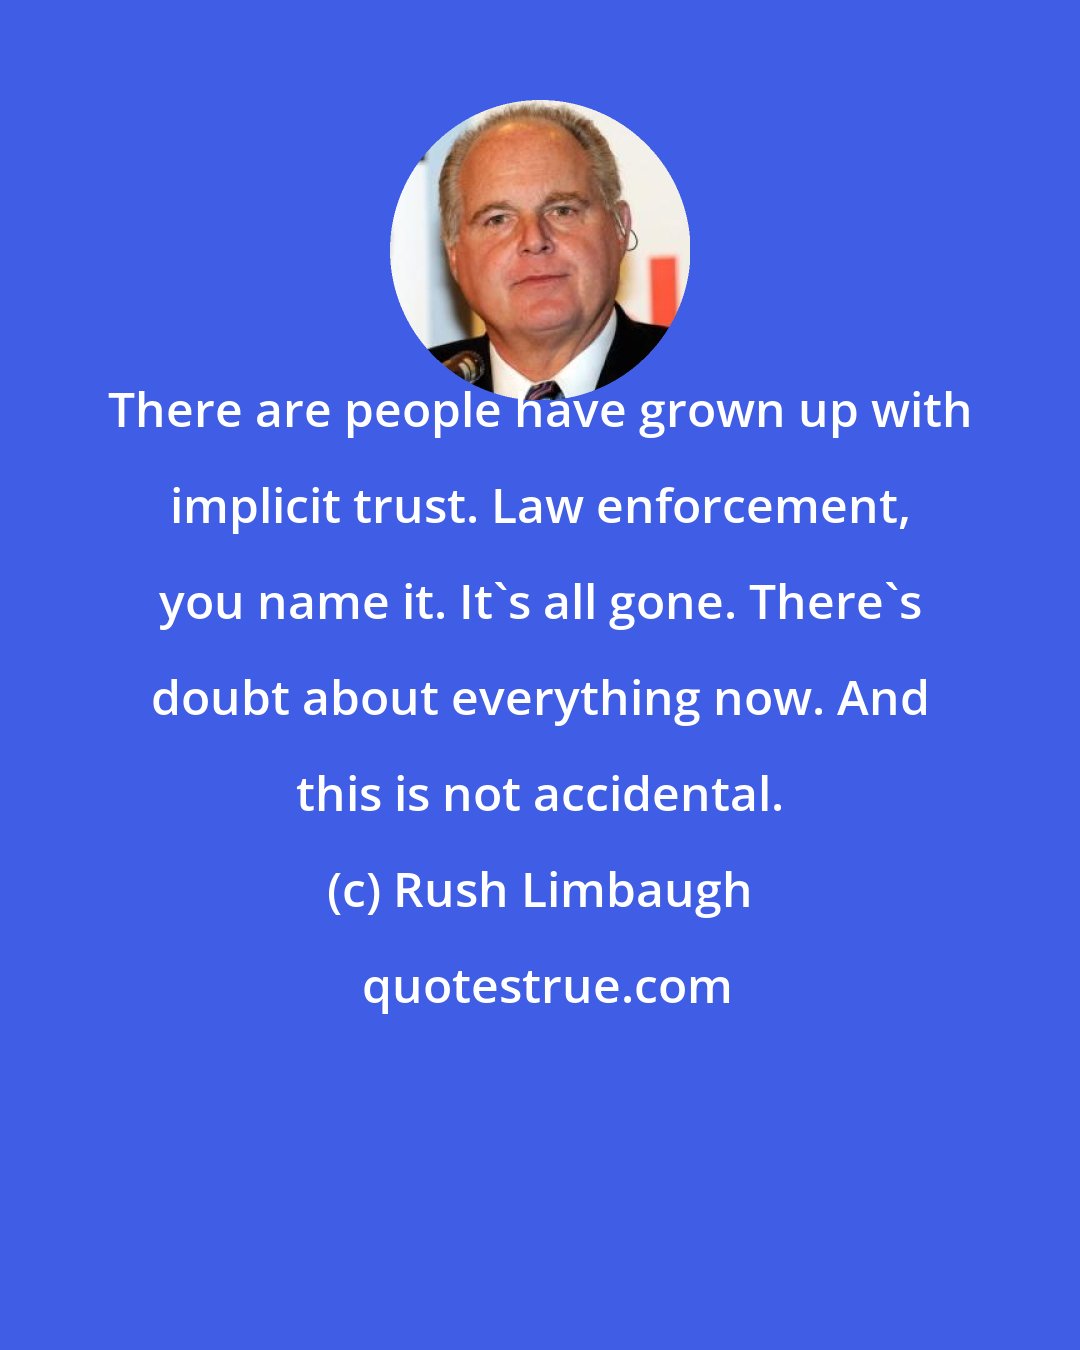 Rush Limbaugh: There are people have grown up with implicit trust. Law enforcement, you name it. It's all gone. There's doubt about everything now. And this is not accidental.